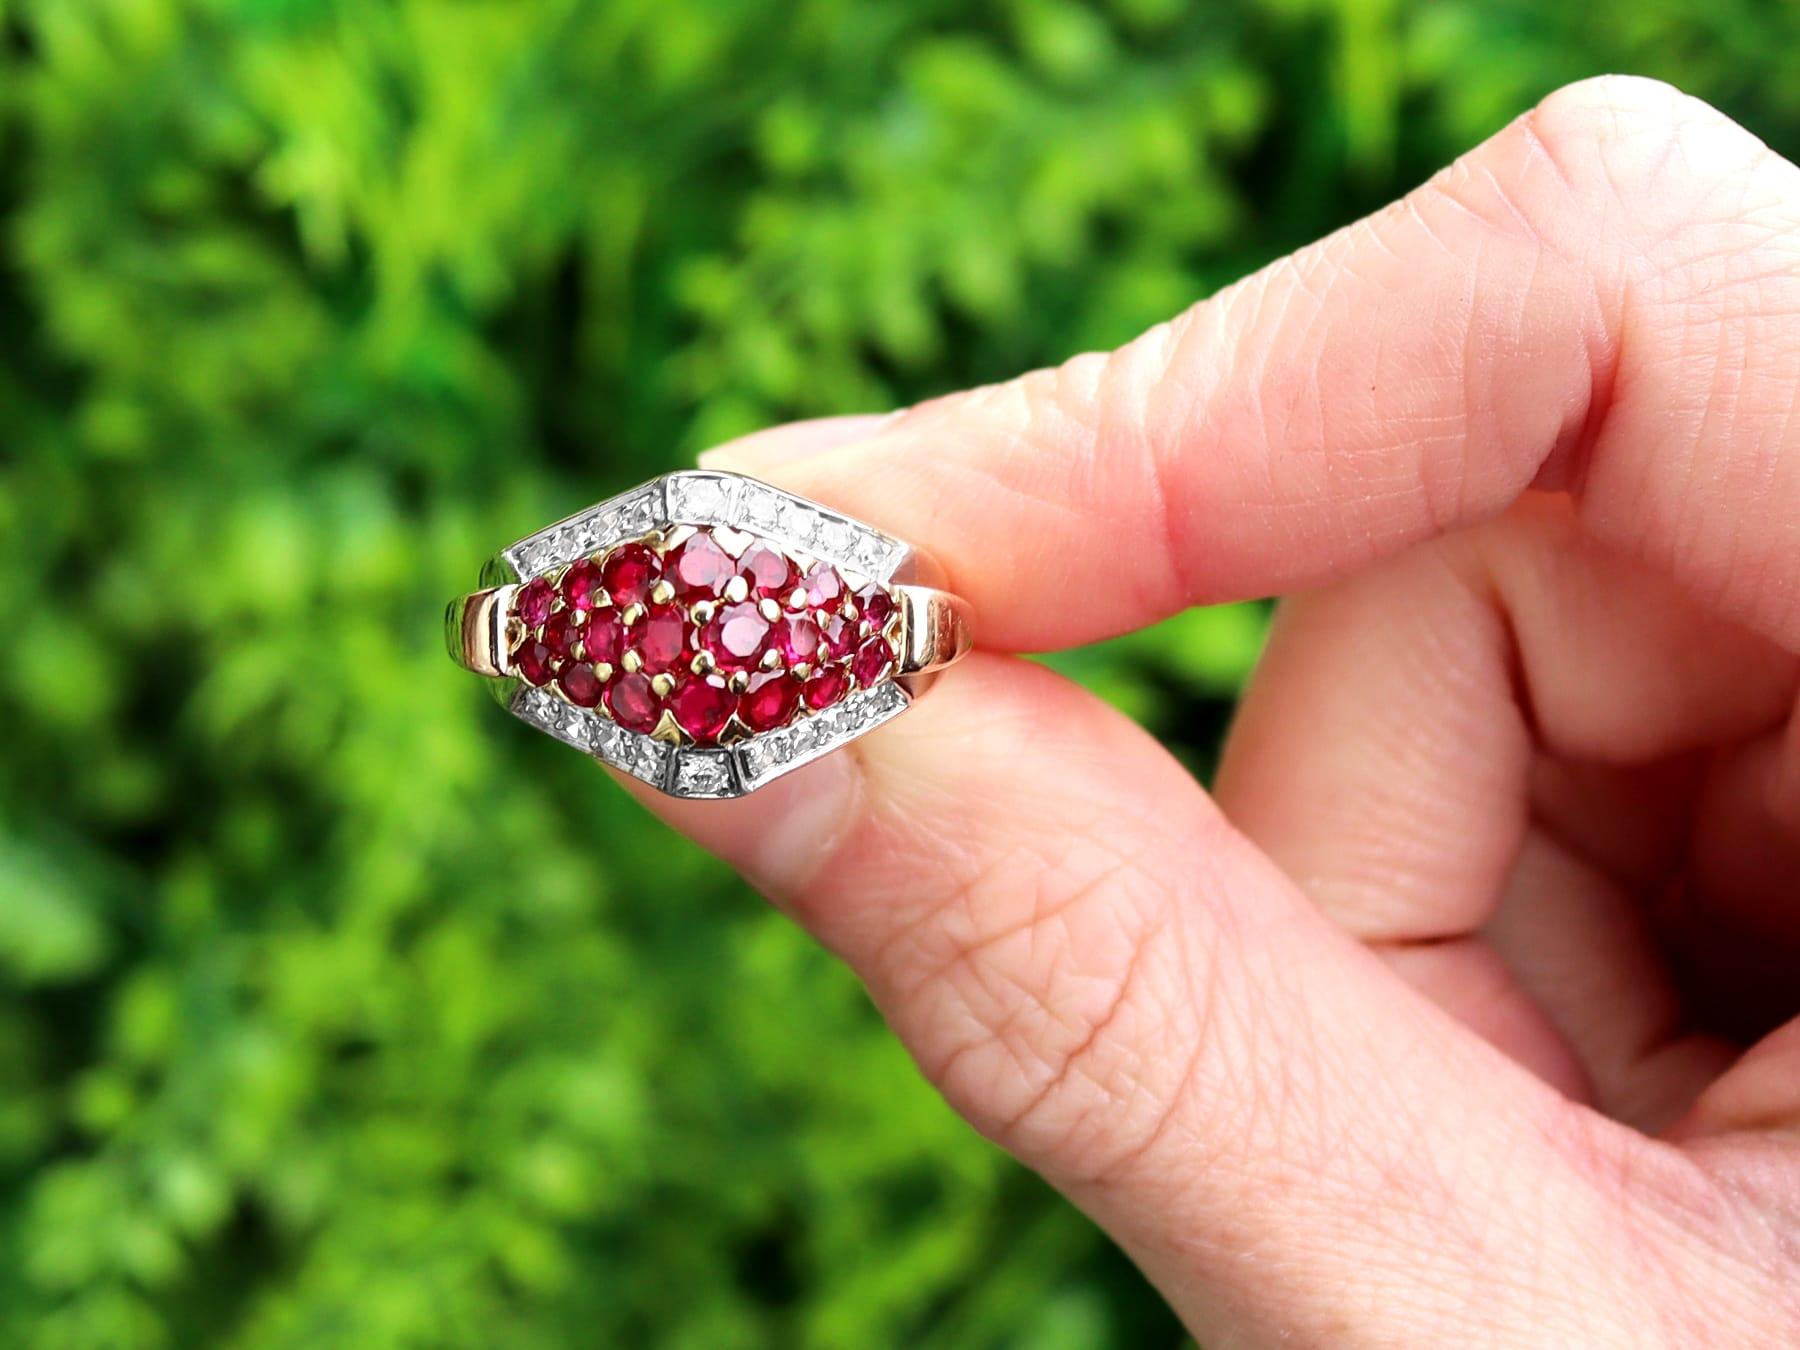 An impressive vintage Art Deco 1.38 carat ruby and 0.57 carat diamond, 14 karat yellow and white gold dress ring; part of our diverse vintage jewelry collections.

This fine and impressive vintage gold ruby dress ring has been crafted in 14k yellow